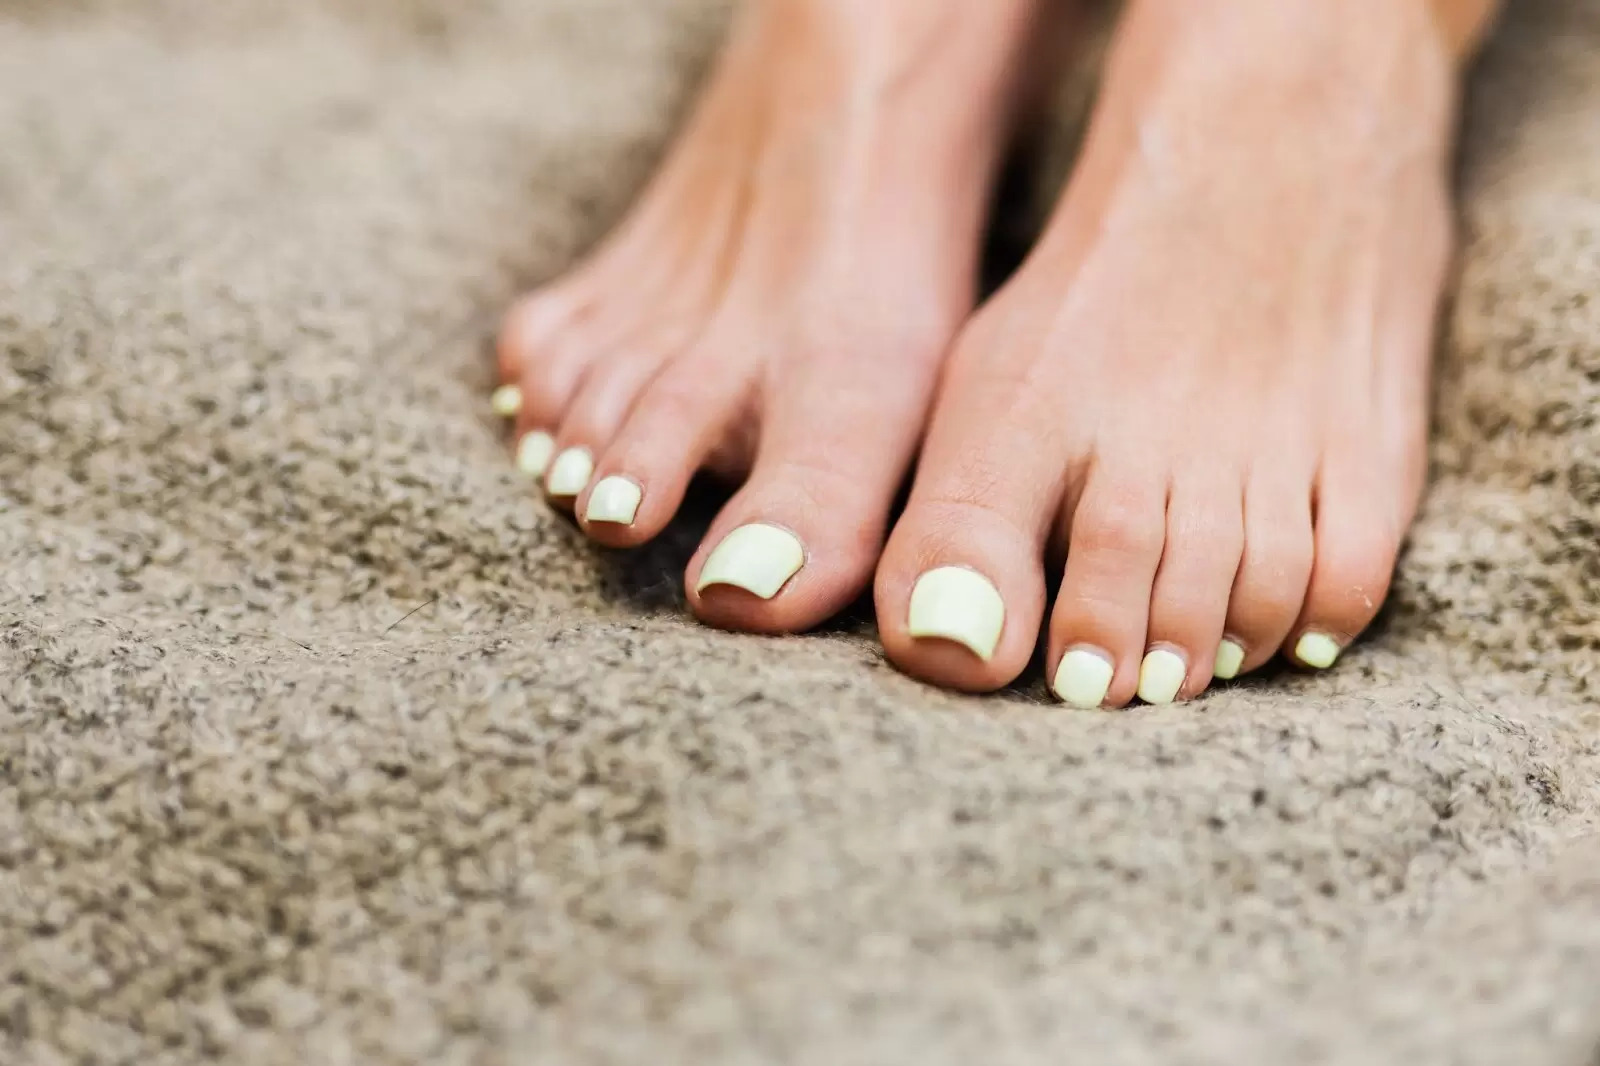 Pamper Your Feet: A Review of the Perfect Pedicure Experience for Her